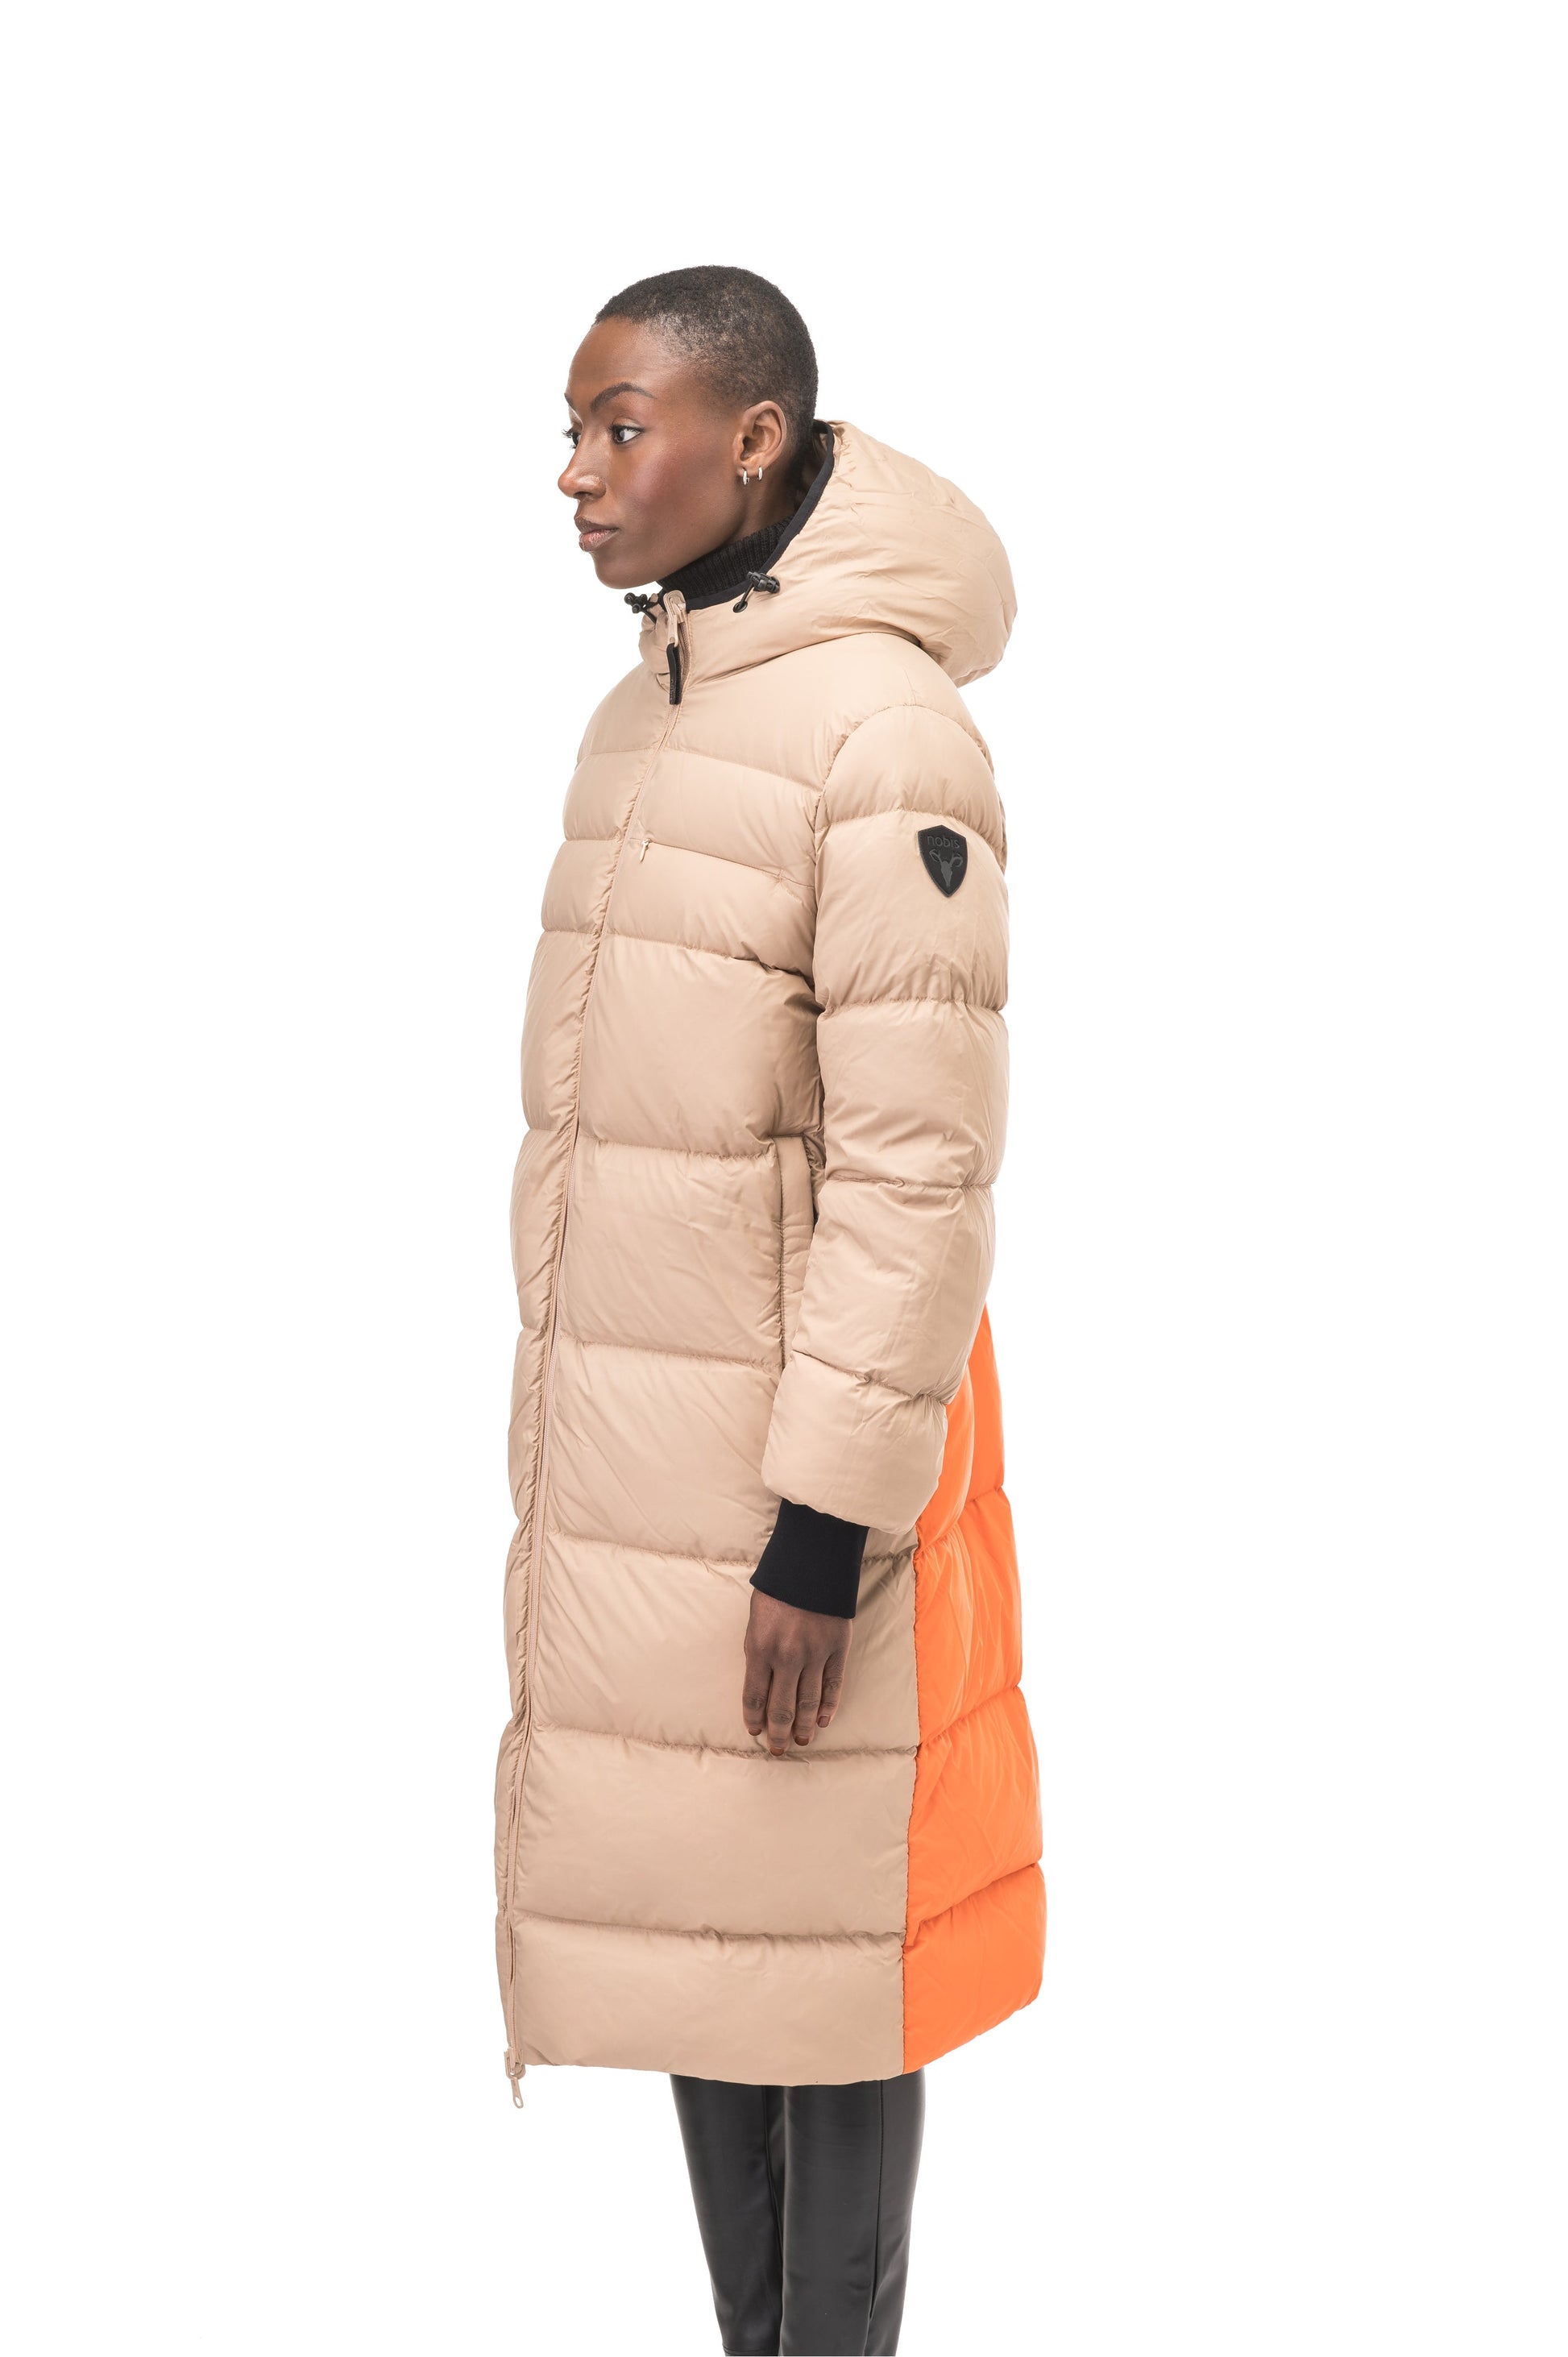 Ladies knee length reversible down-filled parka with non-removable hood in Fawn